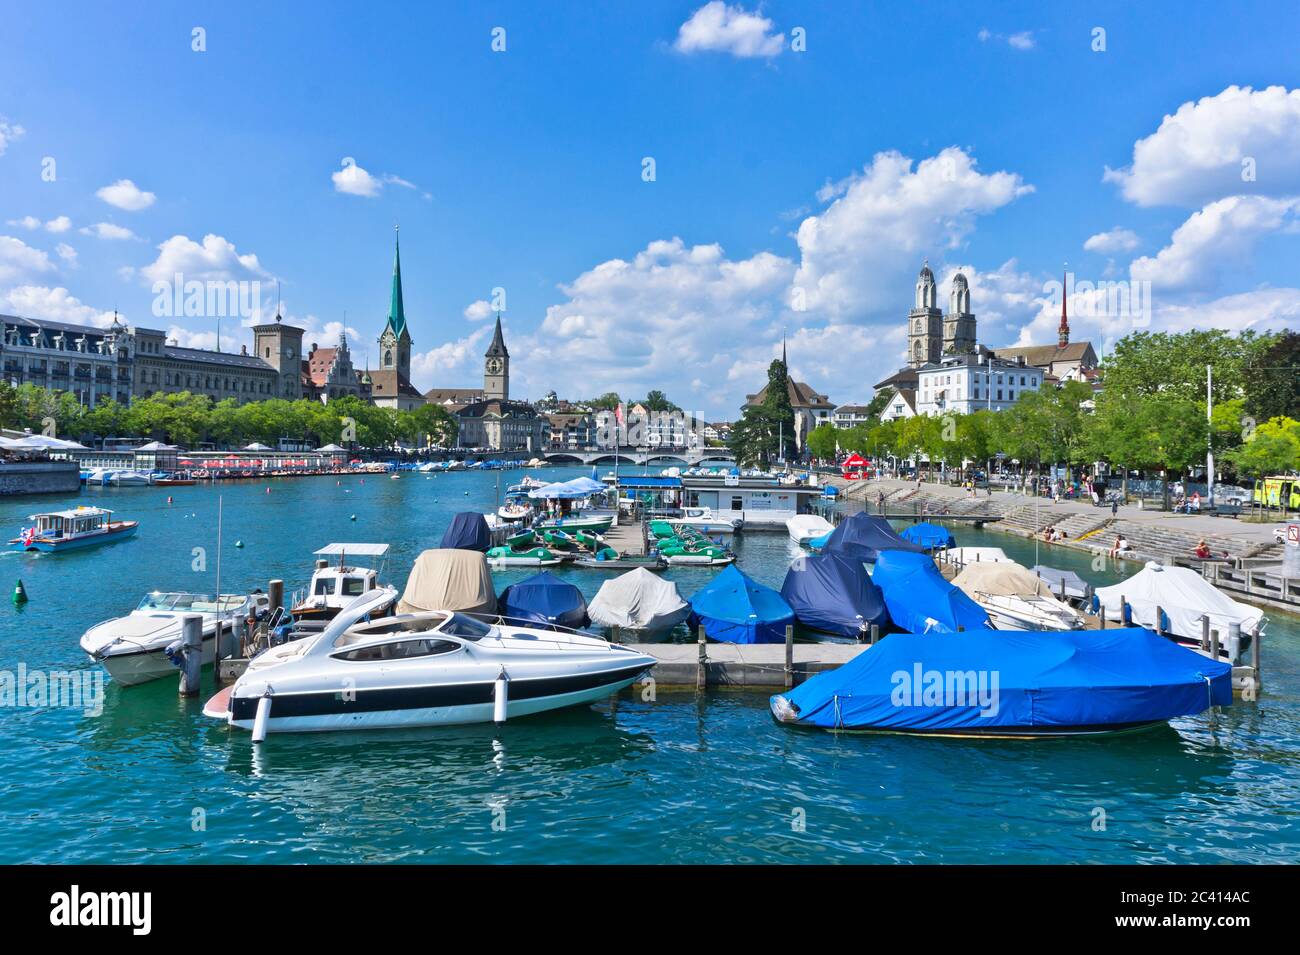 Zurich, Old city view from the lake, Switzerland Stock Photo